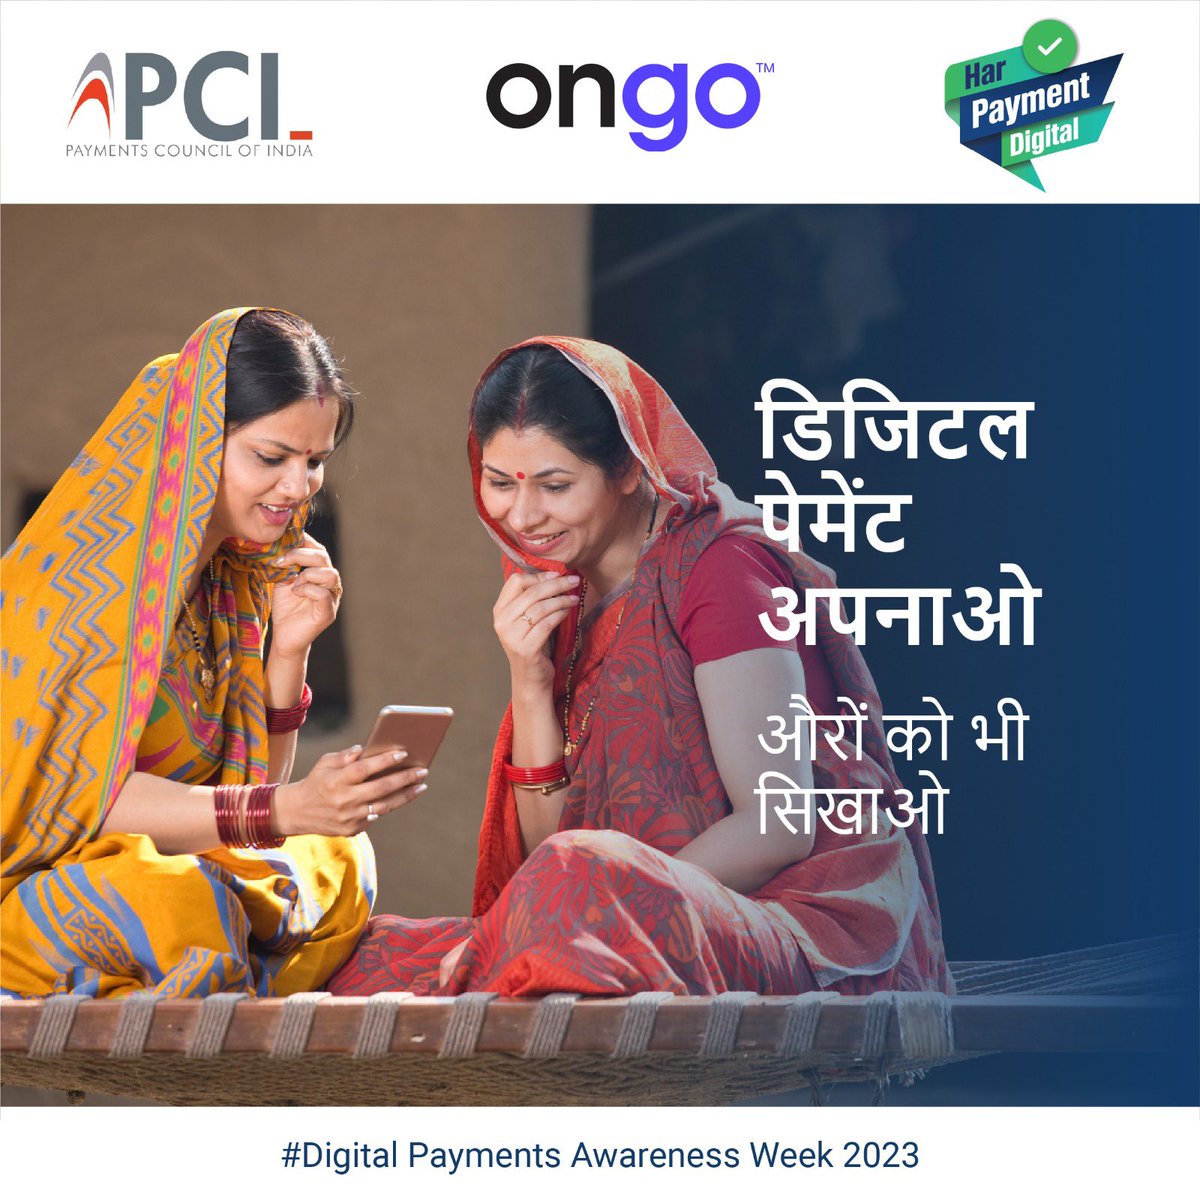 Supporting the “Har Payment Digital” mission of Reserve Bank of India to improve awareness and onboard merchants for digital payments.

#Ongo #AGSTTL #IndiaTransact #digitalpayments #banking #fintech #RBI #harpaymentdigital